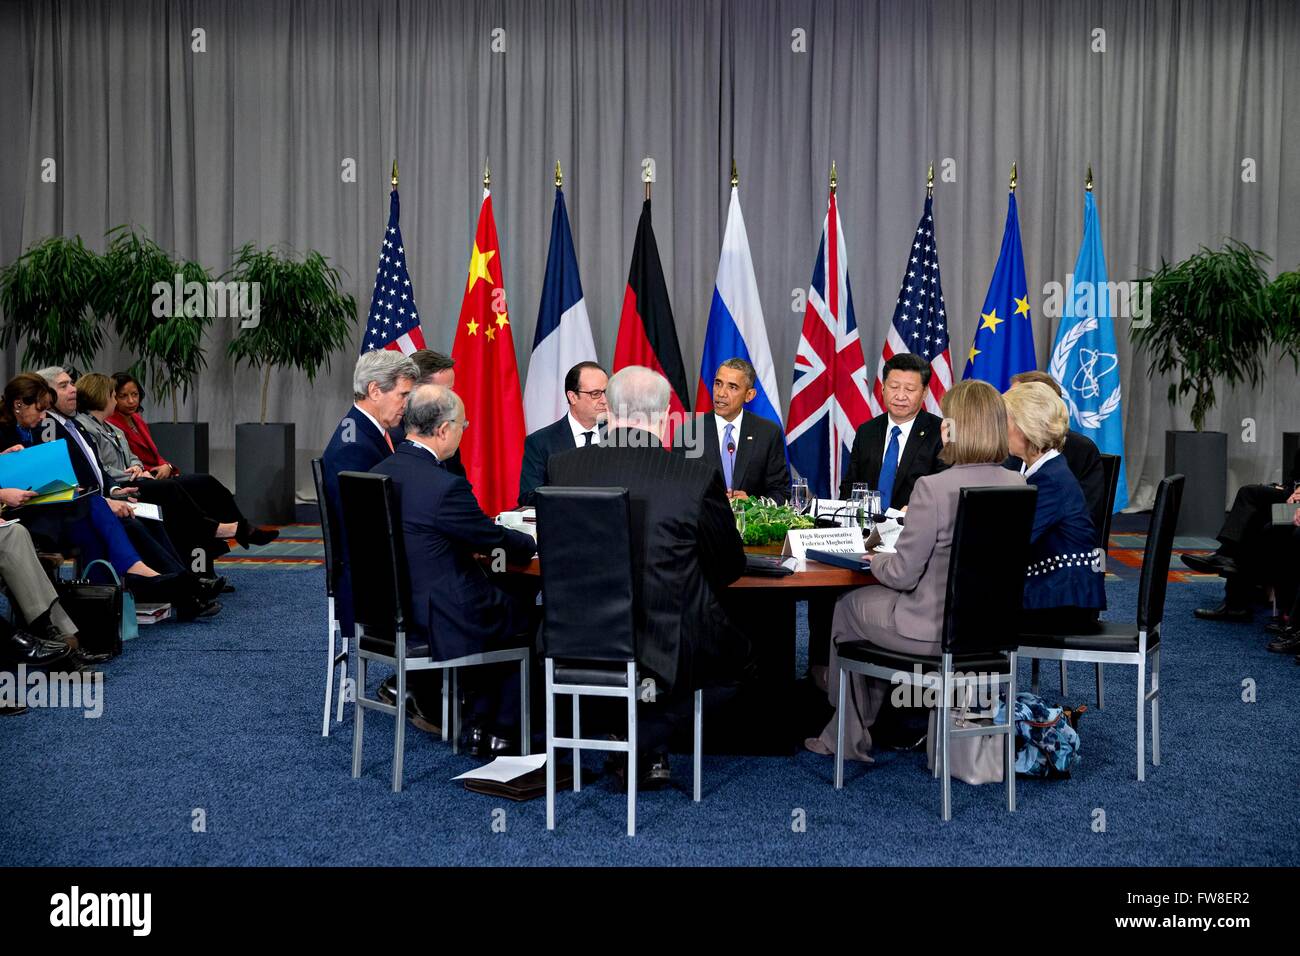 United States President Barack Obama, center, speaks as Xi Jinping, China's president, right, and Francois Hollande, France's president, left, listen during a P5 1 multilateral meeting at the Nuclear Security Summit in Washington, DC, U.S., on Friday, April 1, 2016. After a spate of terrorist attacks from Europe to Africa, Obama is rallying international support during the summit for an effort to keep Islamic State and similar groups from obtaining nuclear material and other weapons of mass destruction. Credit: Andrew Harrer/Pool via CNP - NO WIRE SERVICE - Stock Photo